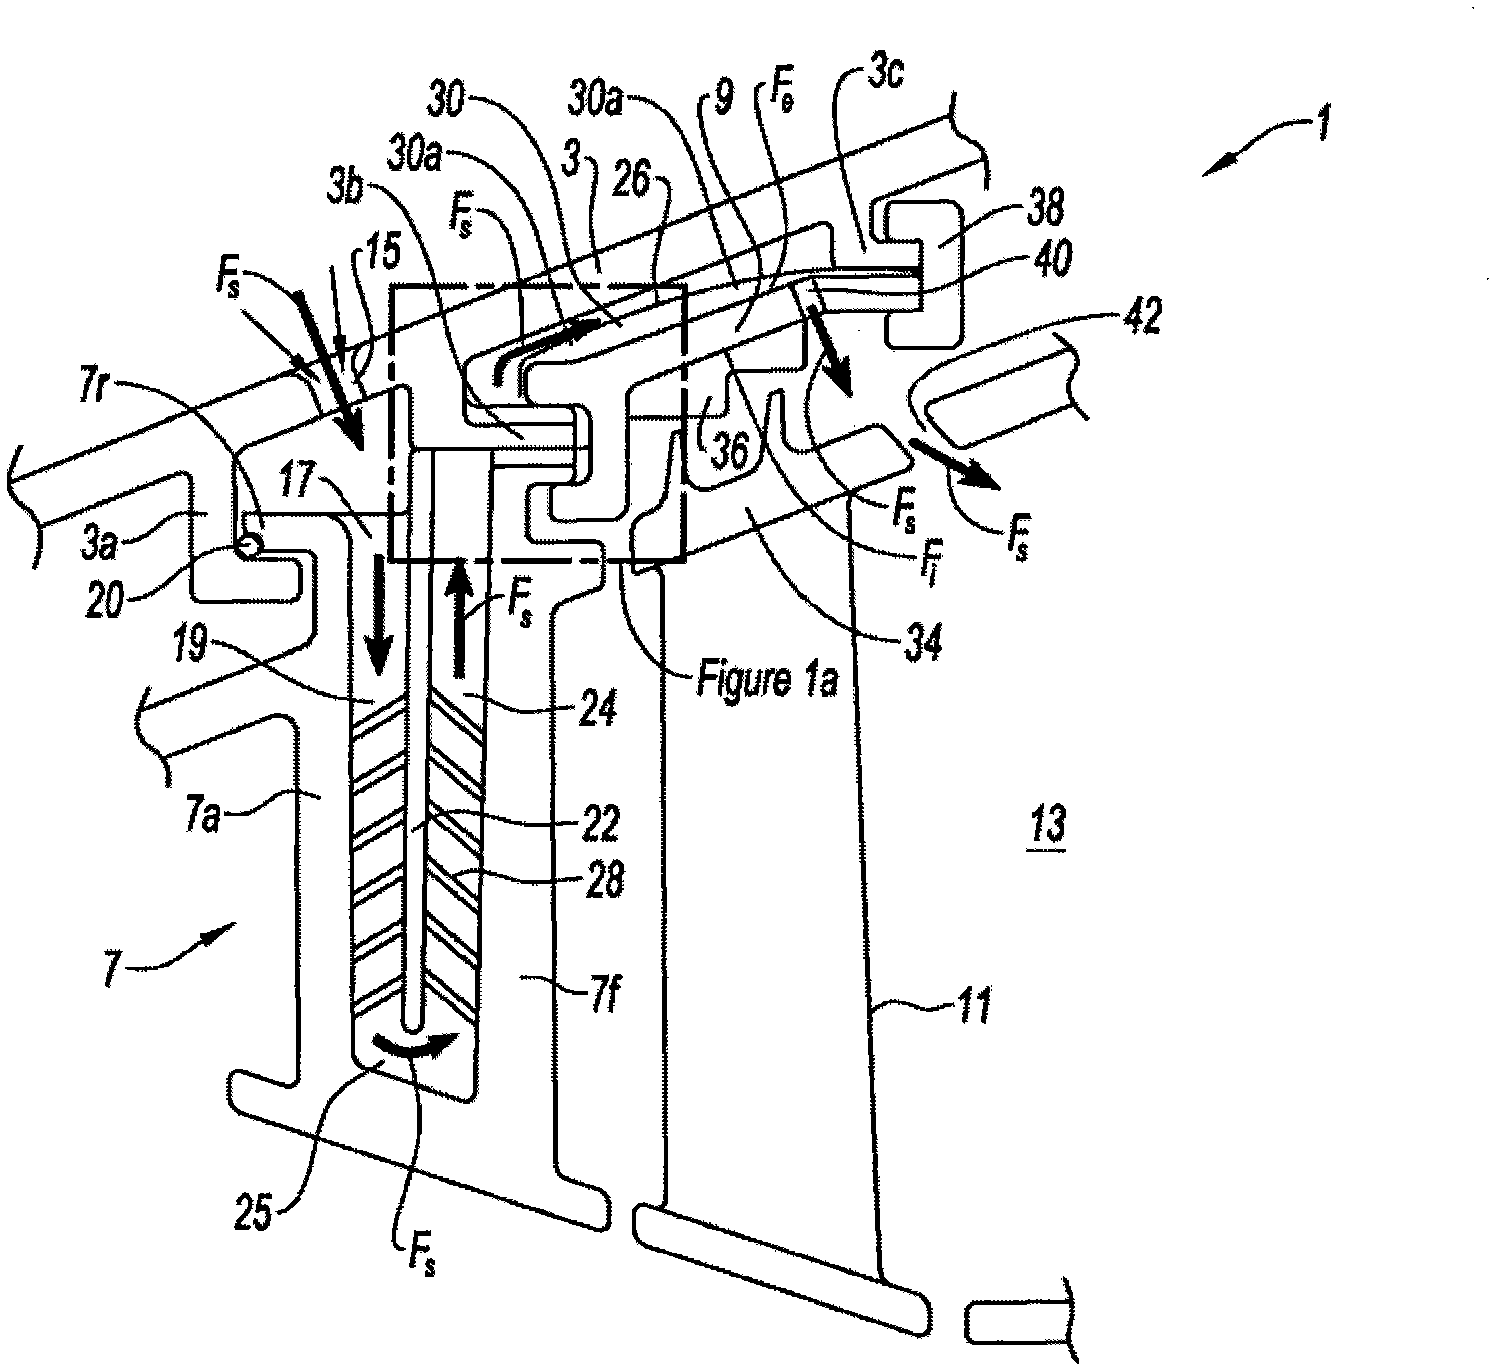 Method for cooling turbine stators and cooling system for implementing said method